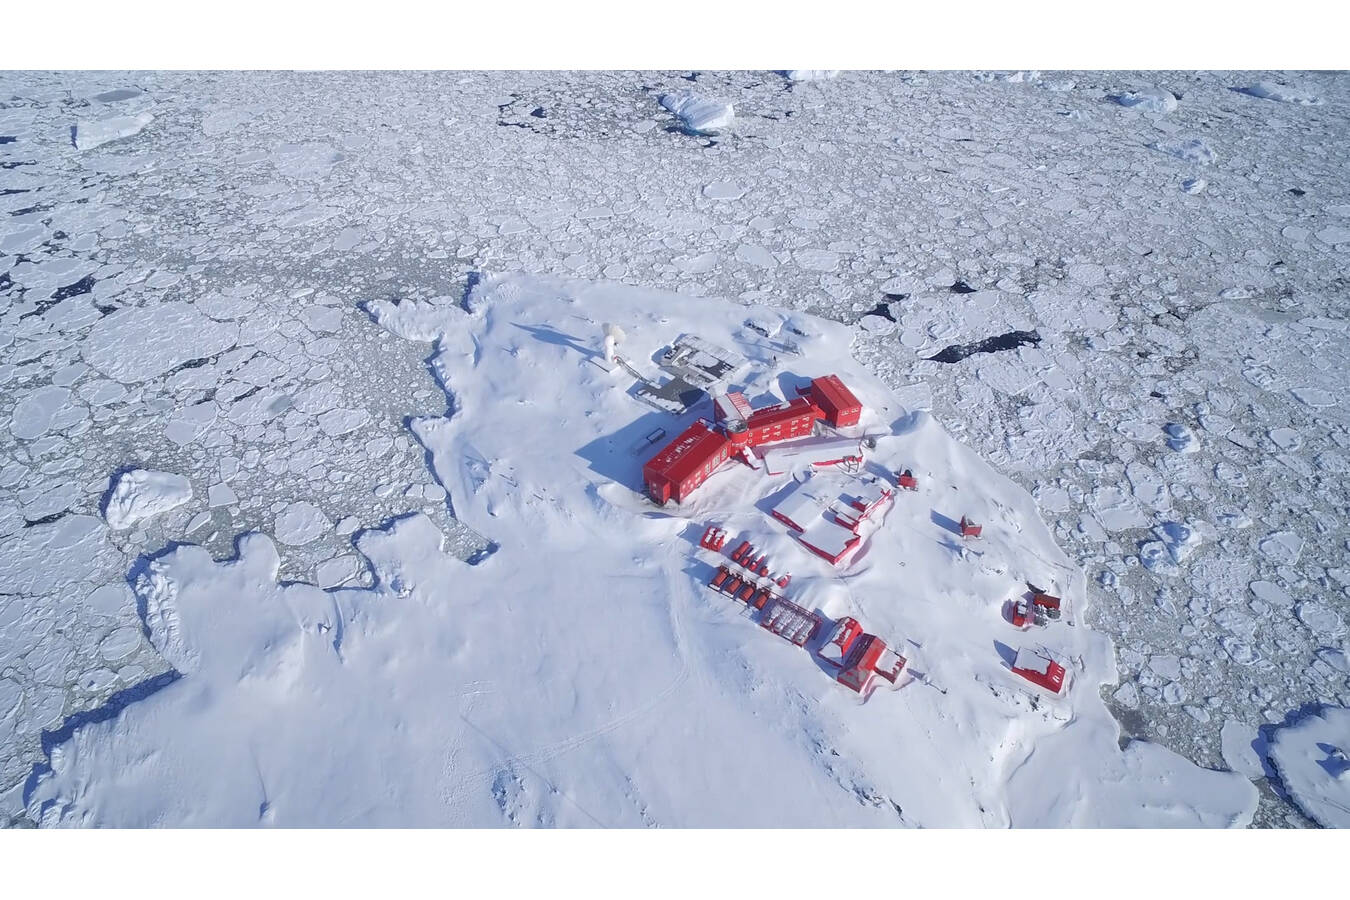 Environmental protection in Antarctica: Erdwich Two-Shaft Shredder Two-Shaft Shredder reduces waste volume by 80 per cent at German research station GARS O’Higgins